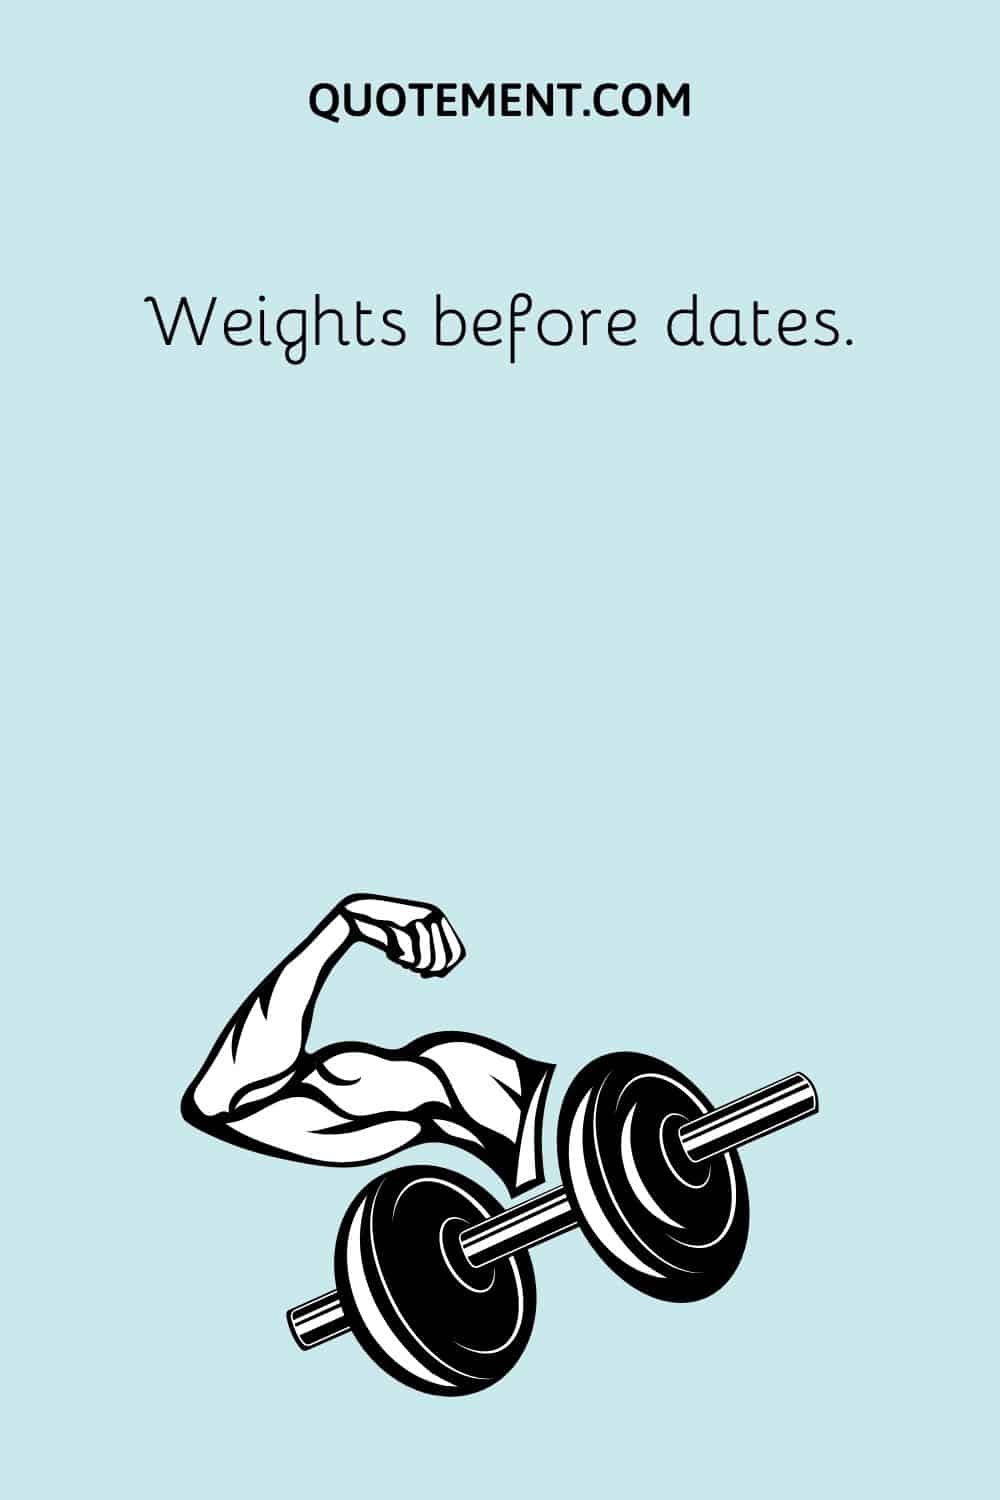 Weights before dates.